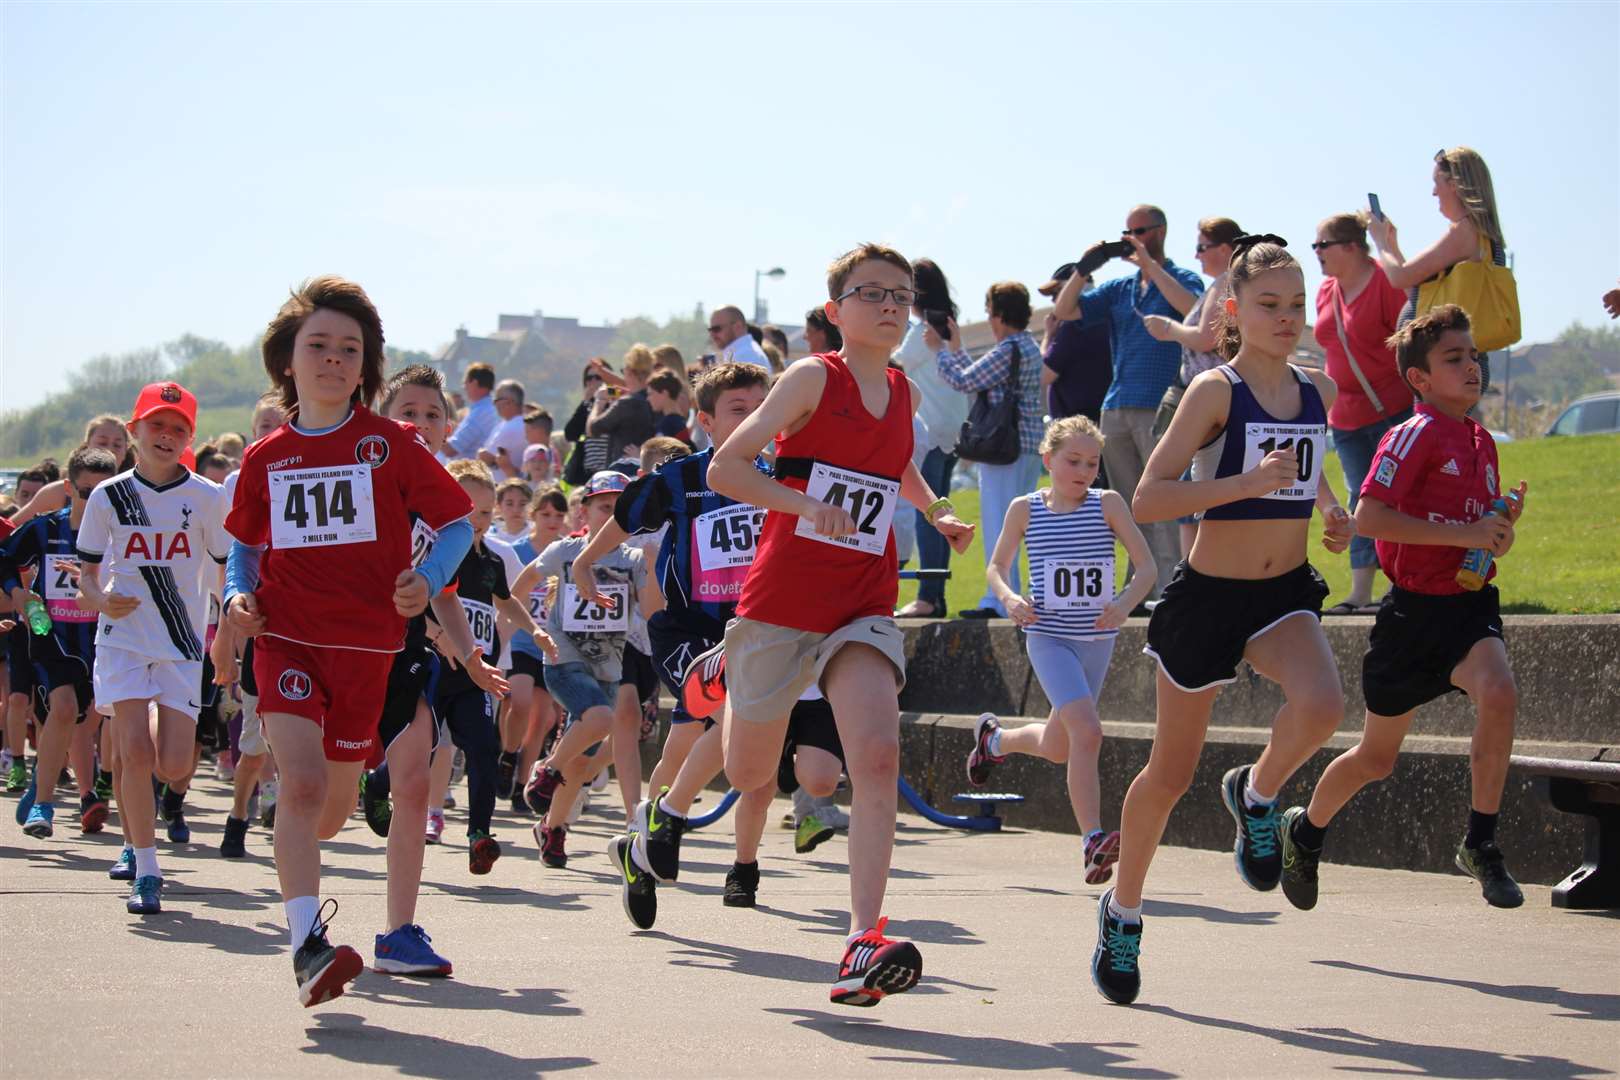 Start of the two-mile fun run at Minster Leas